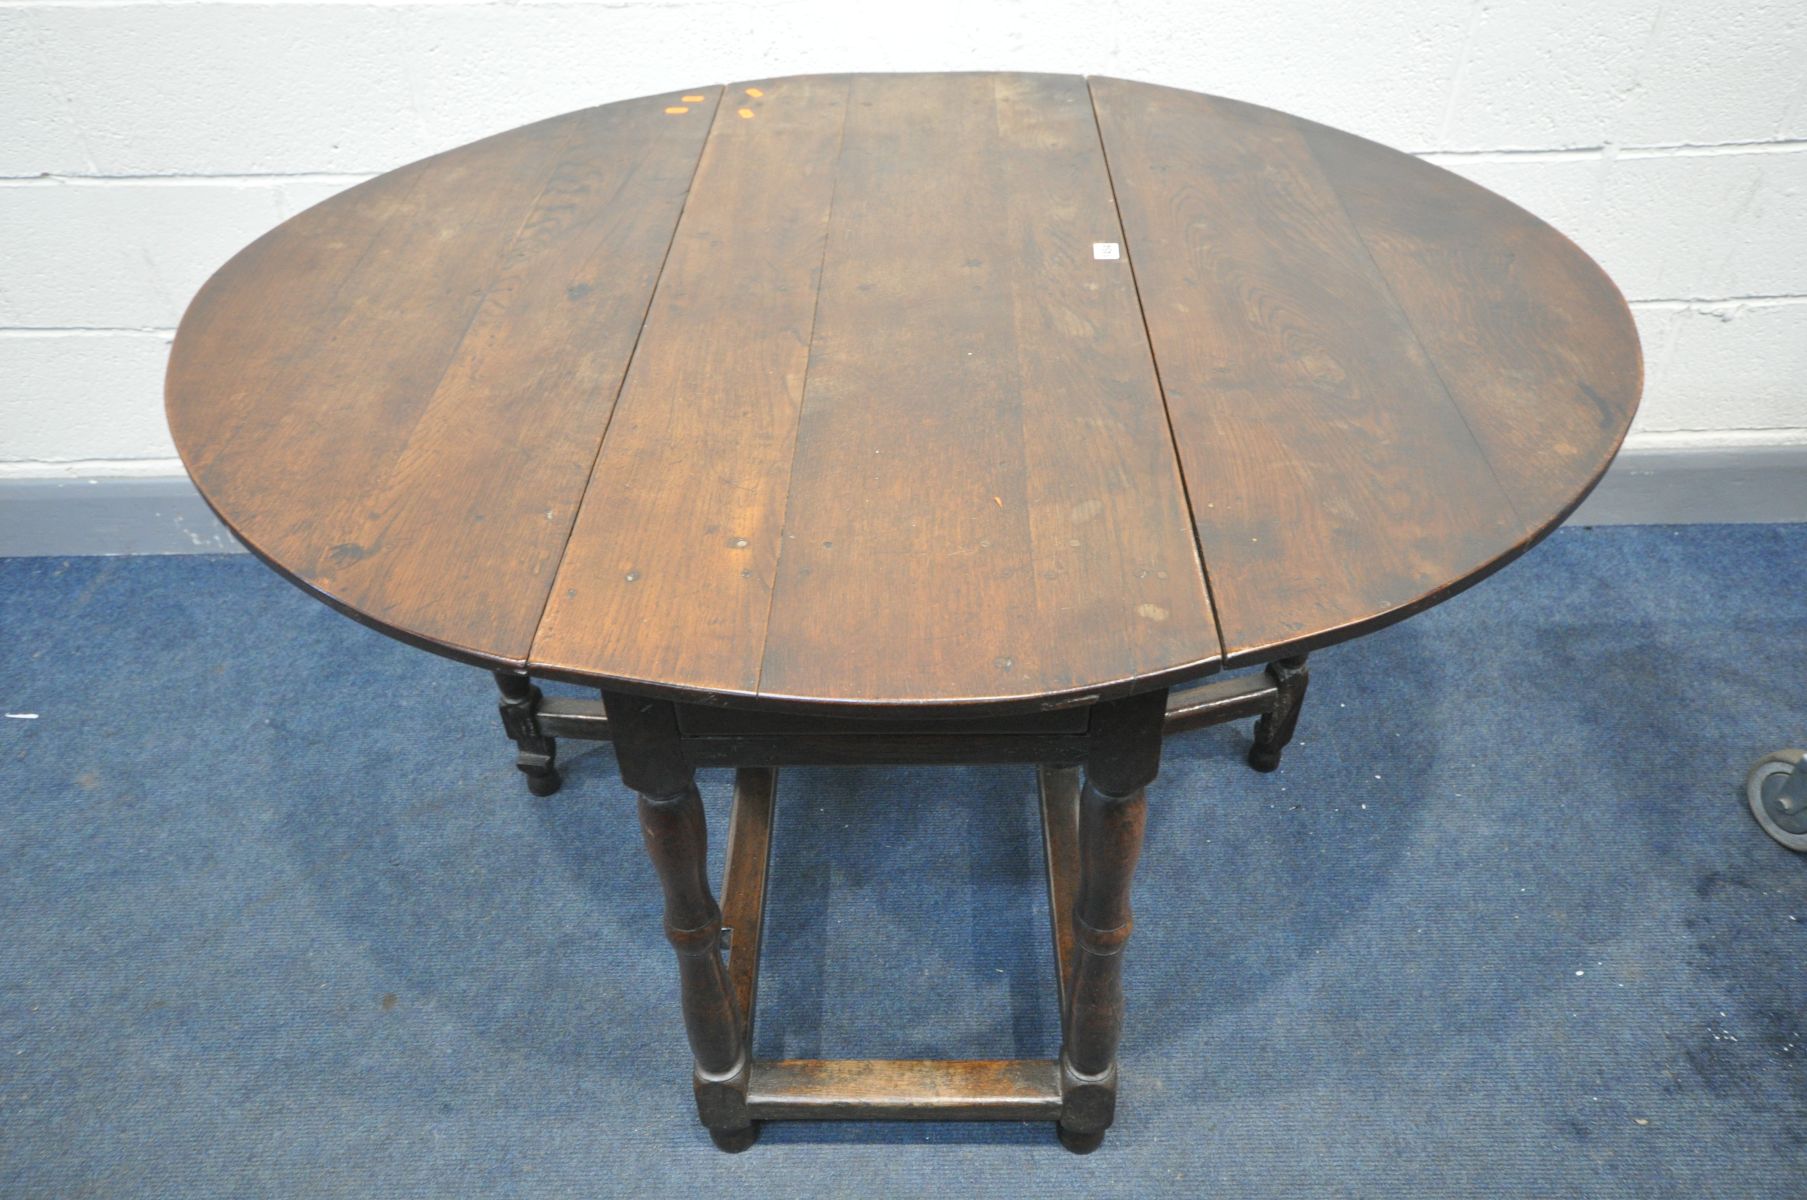 AN 18TH CENTURY JOINT OAK OVAL TOP GATE LEG TABLE, with two drawers, on block and turned legs united - Image 2 of 4